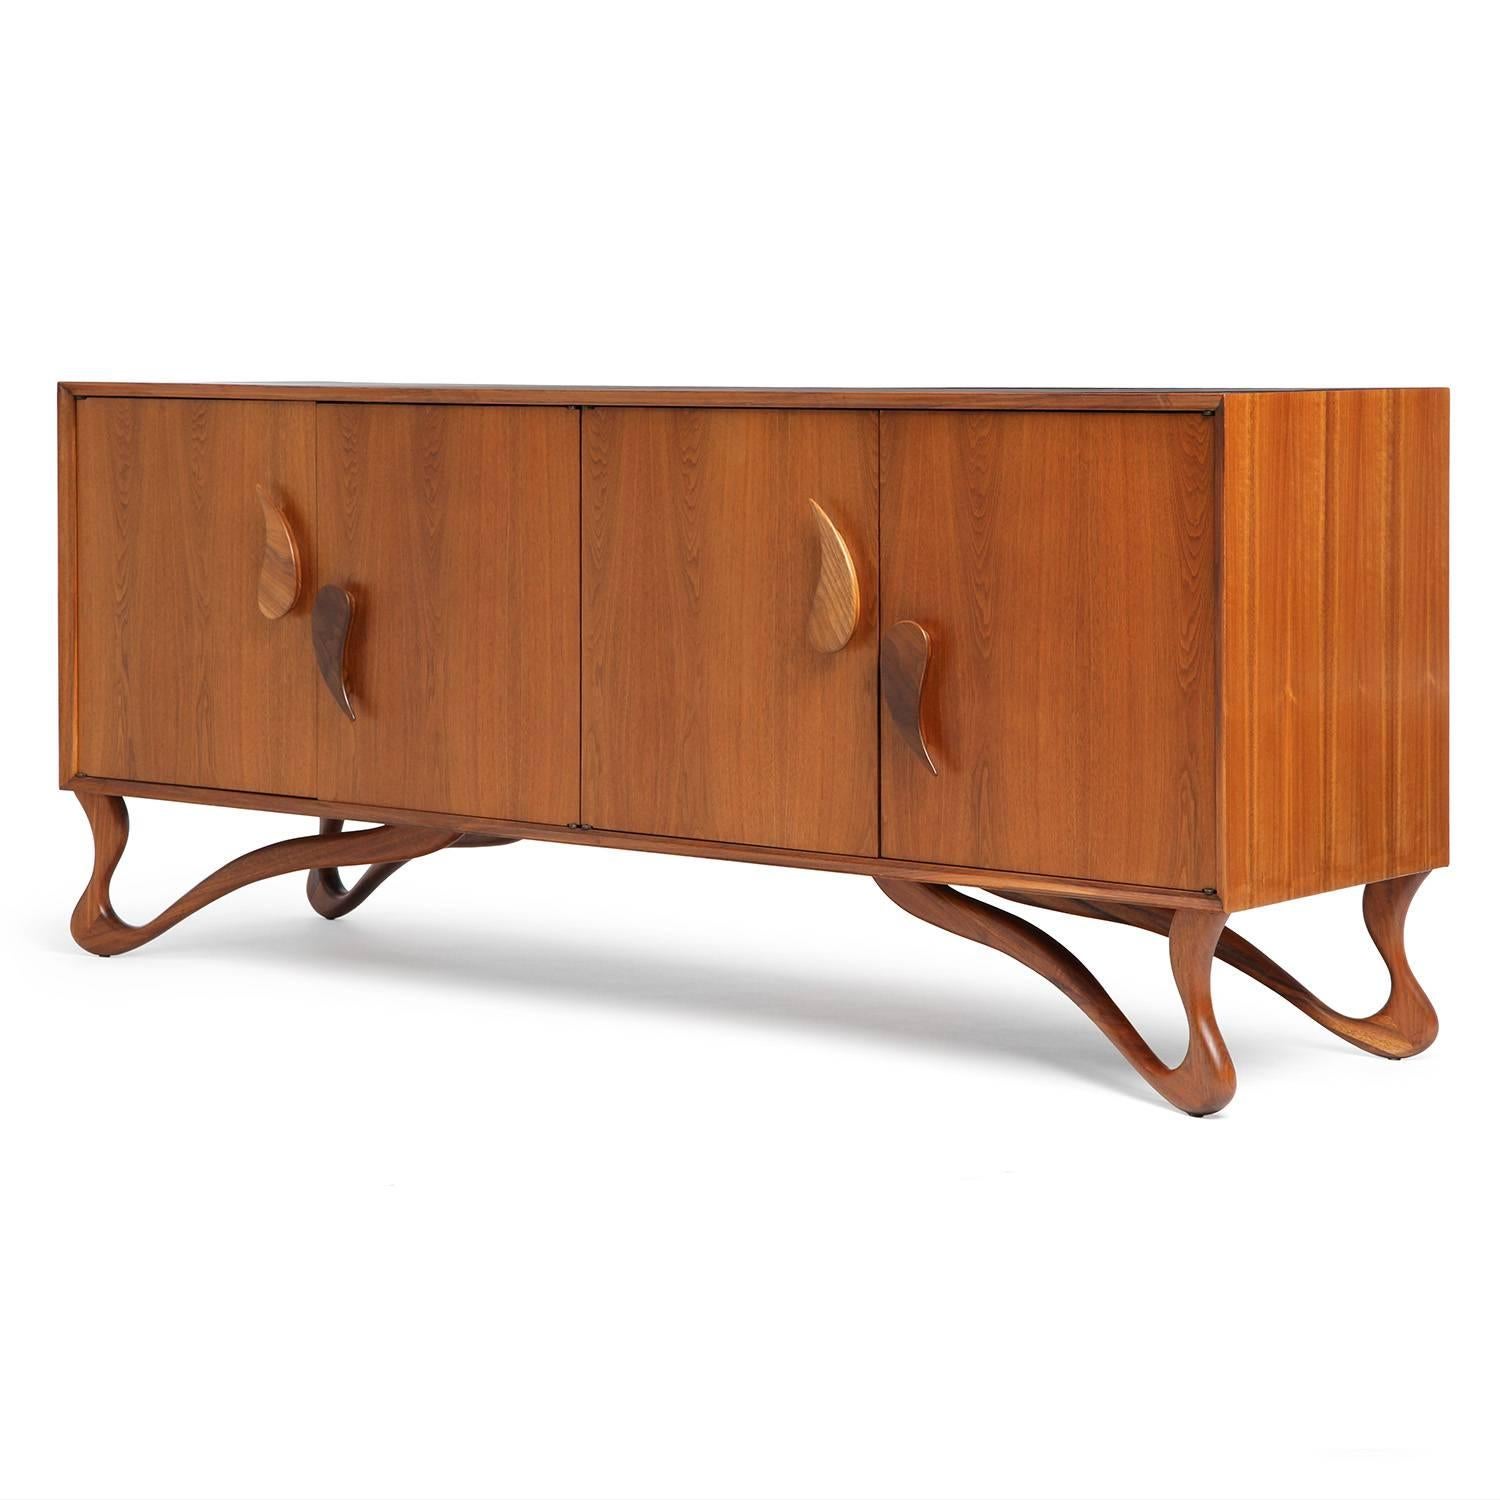 Mid-20th Century Sculptural Sideboard